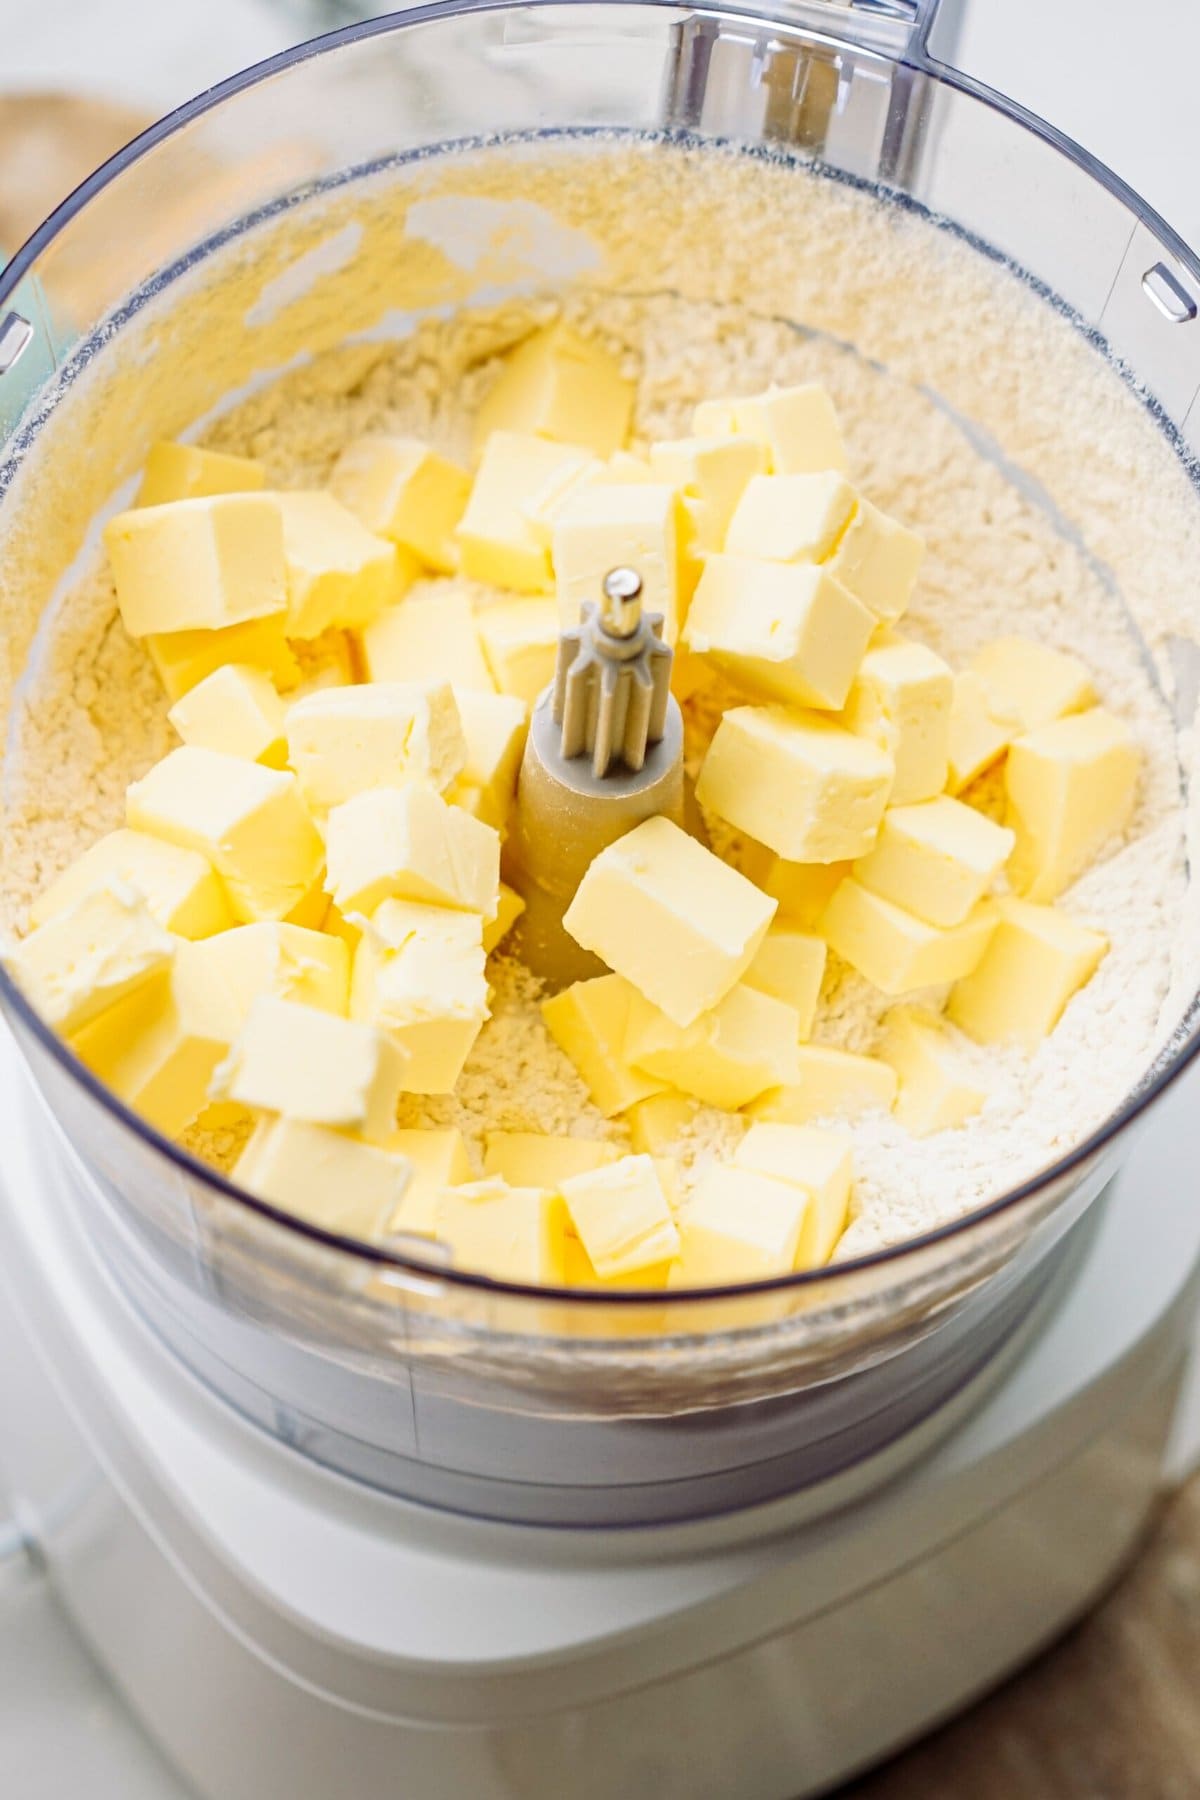 cubes of butter added to the food processor with flour mixture